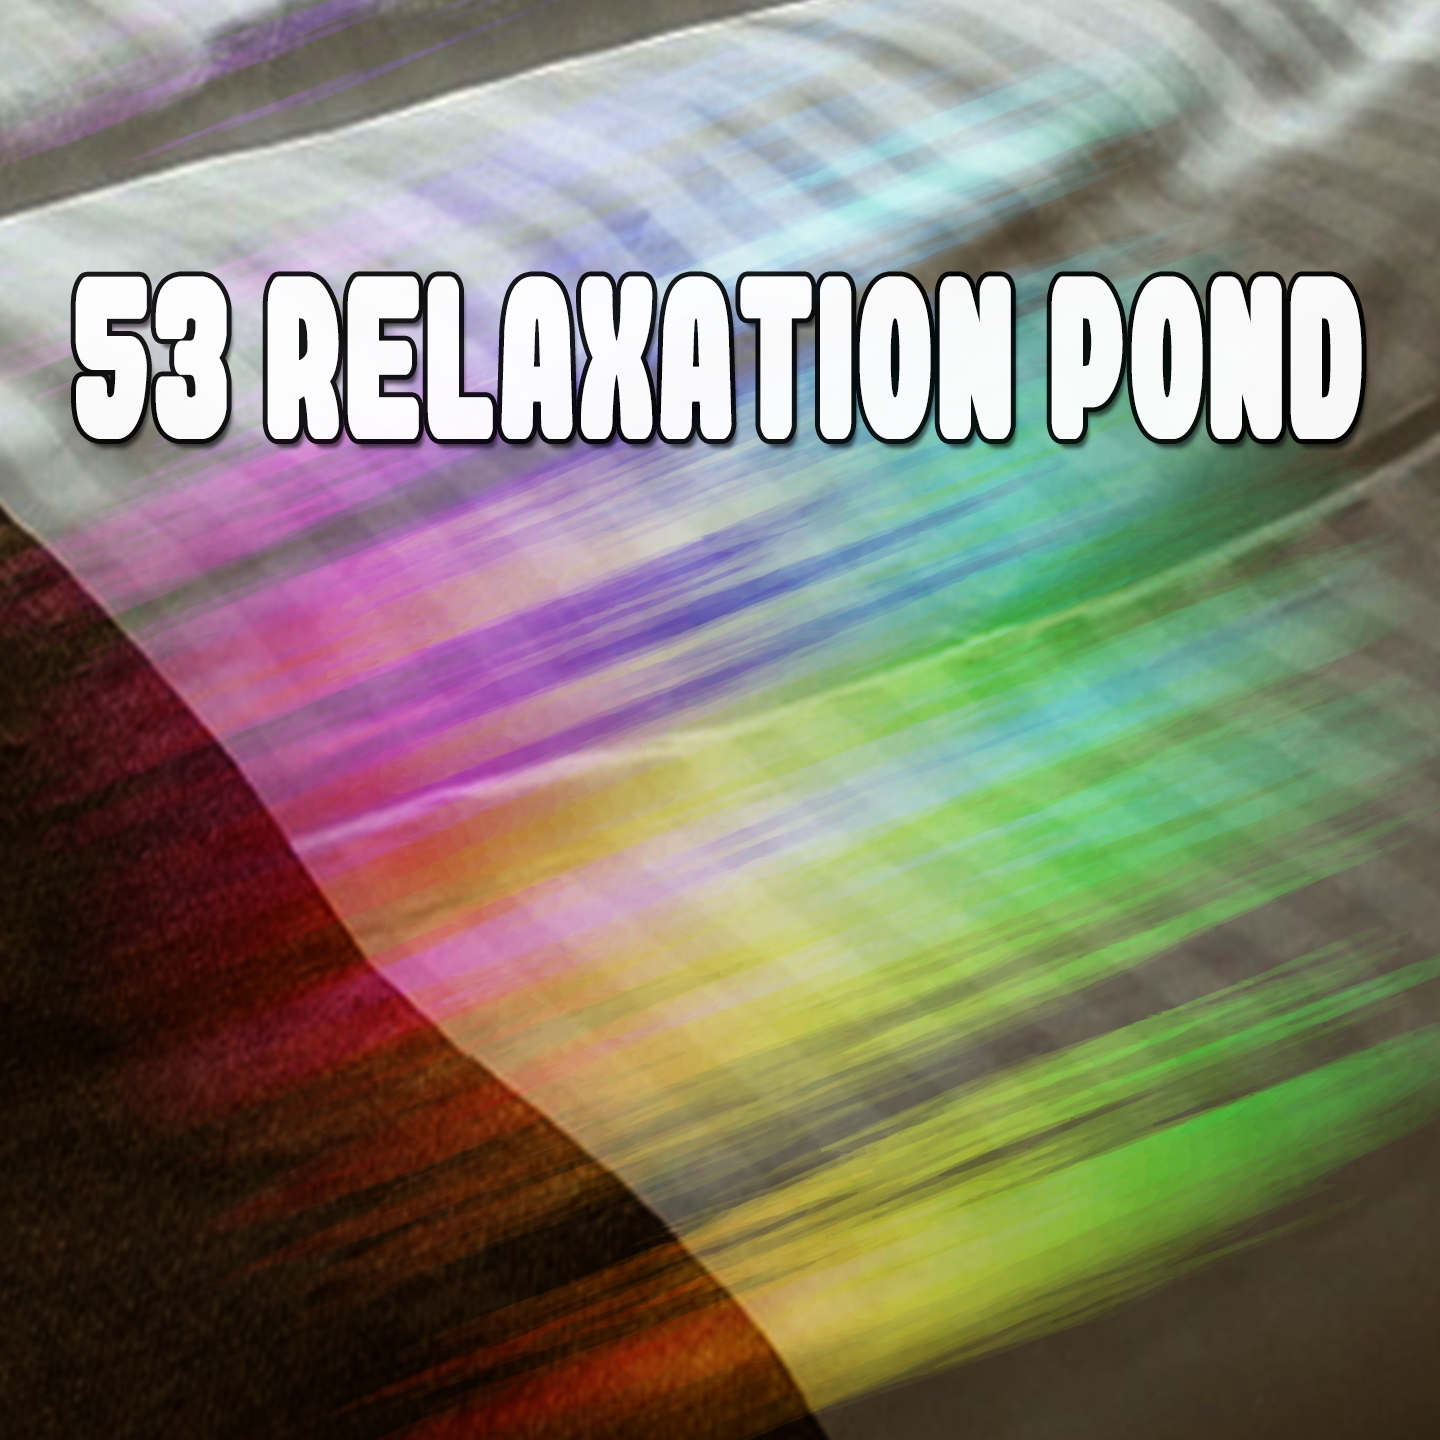 53 Relaxation Pond